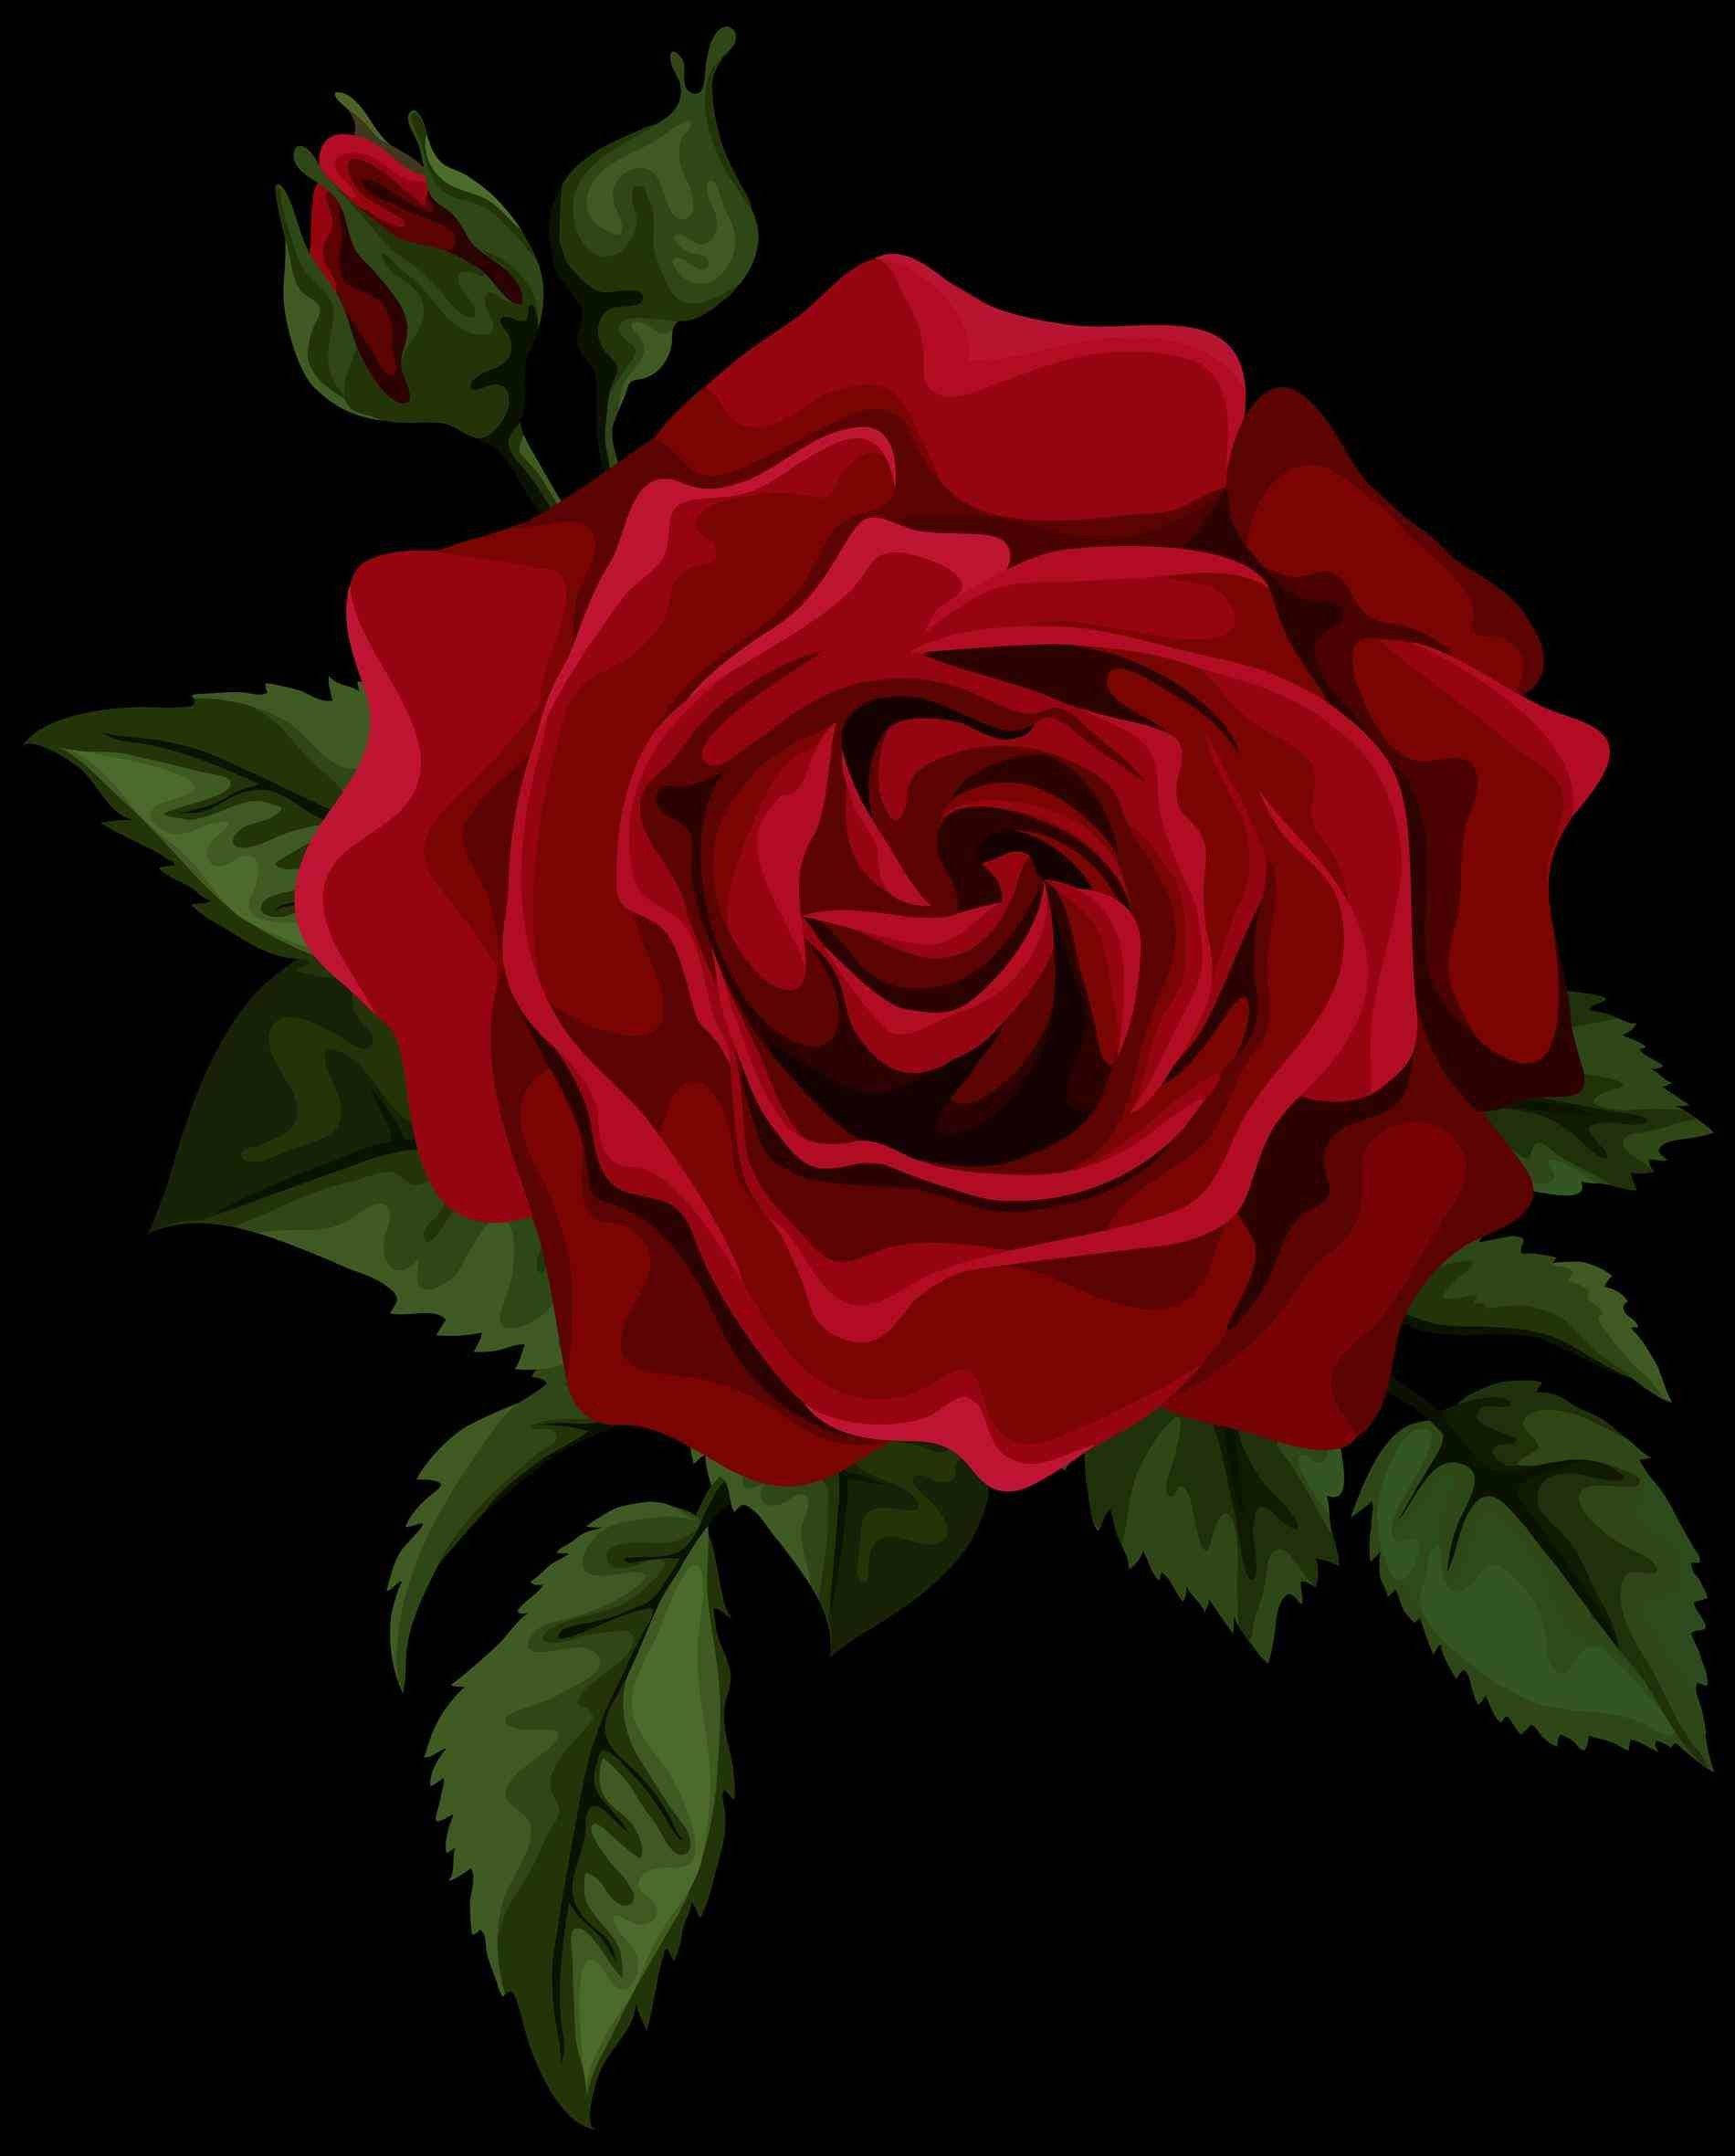 A Red Rose On A Black Background Background